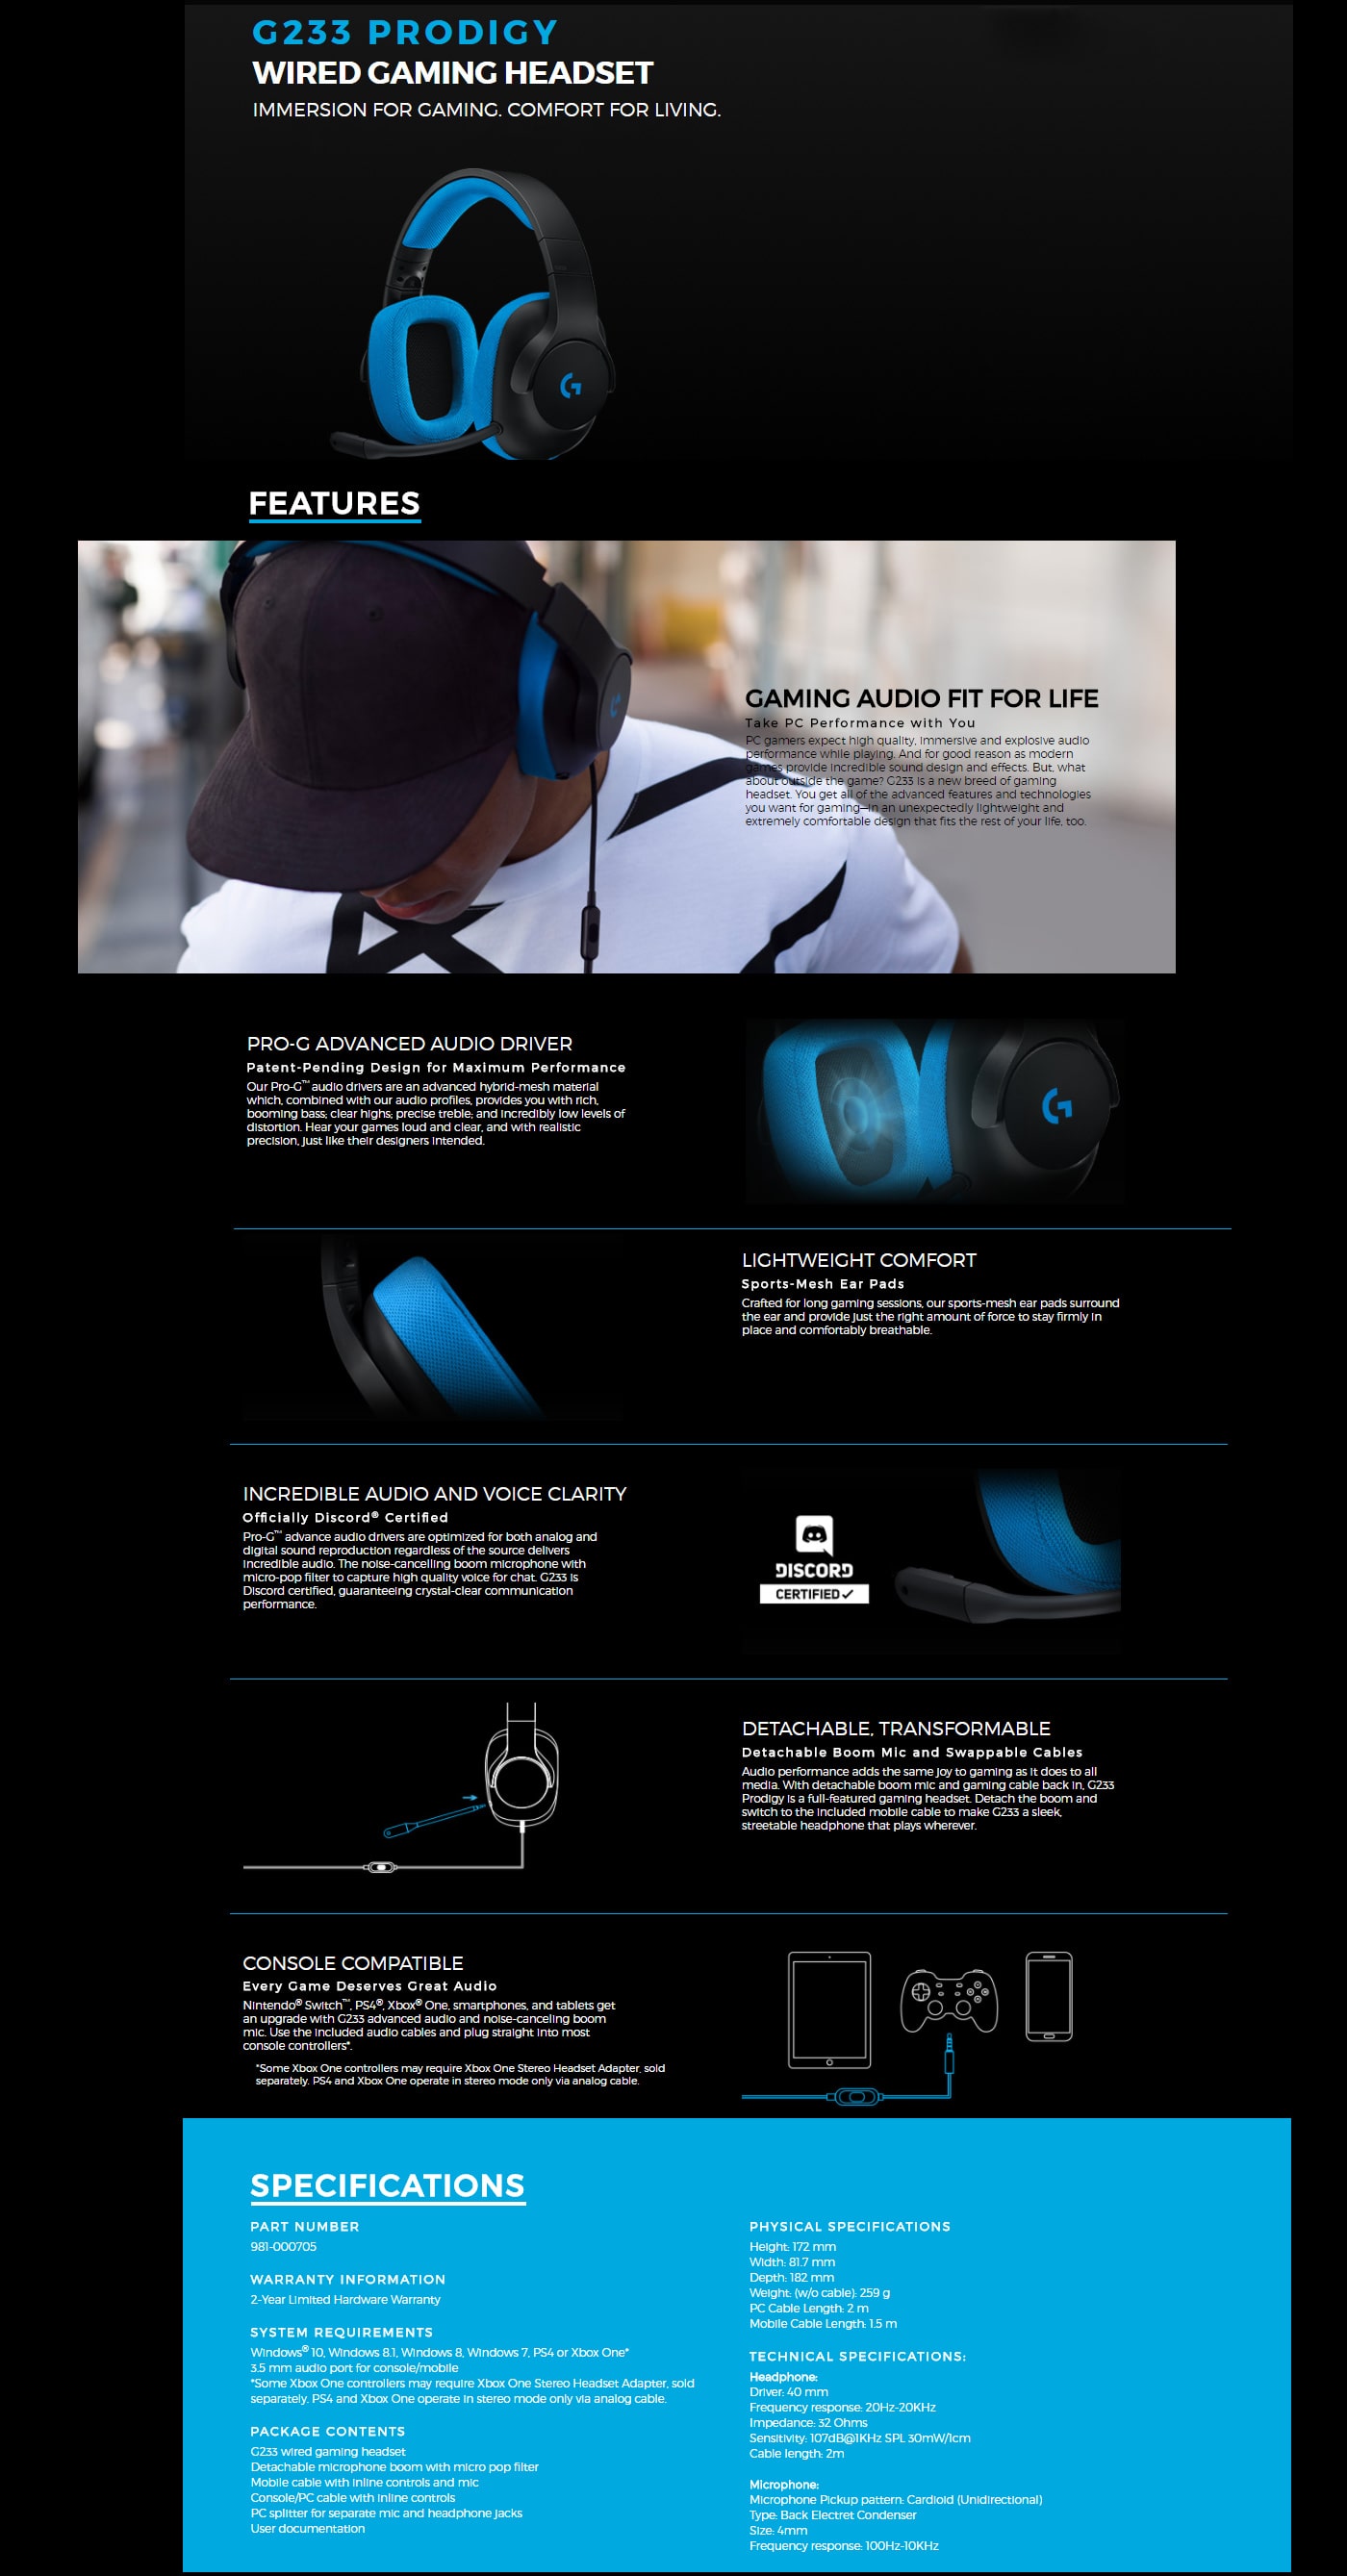 Logitech G233 Prodigy Wired Gaming Headset features